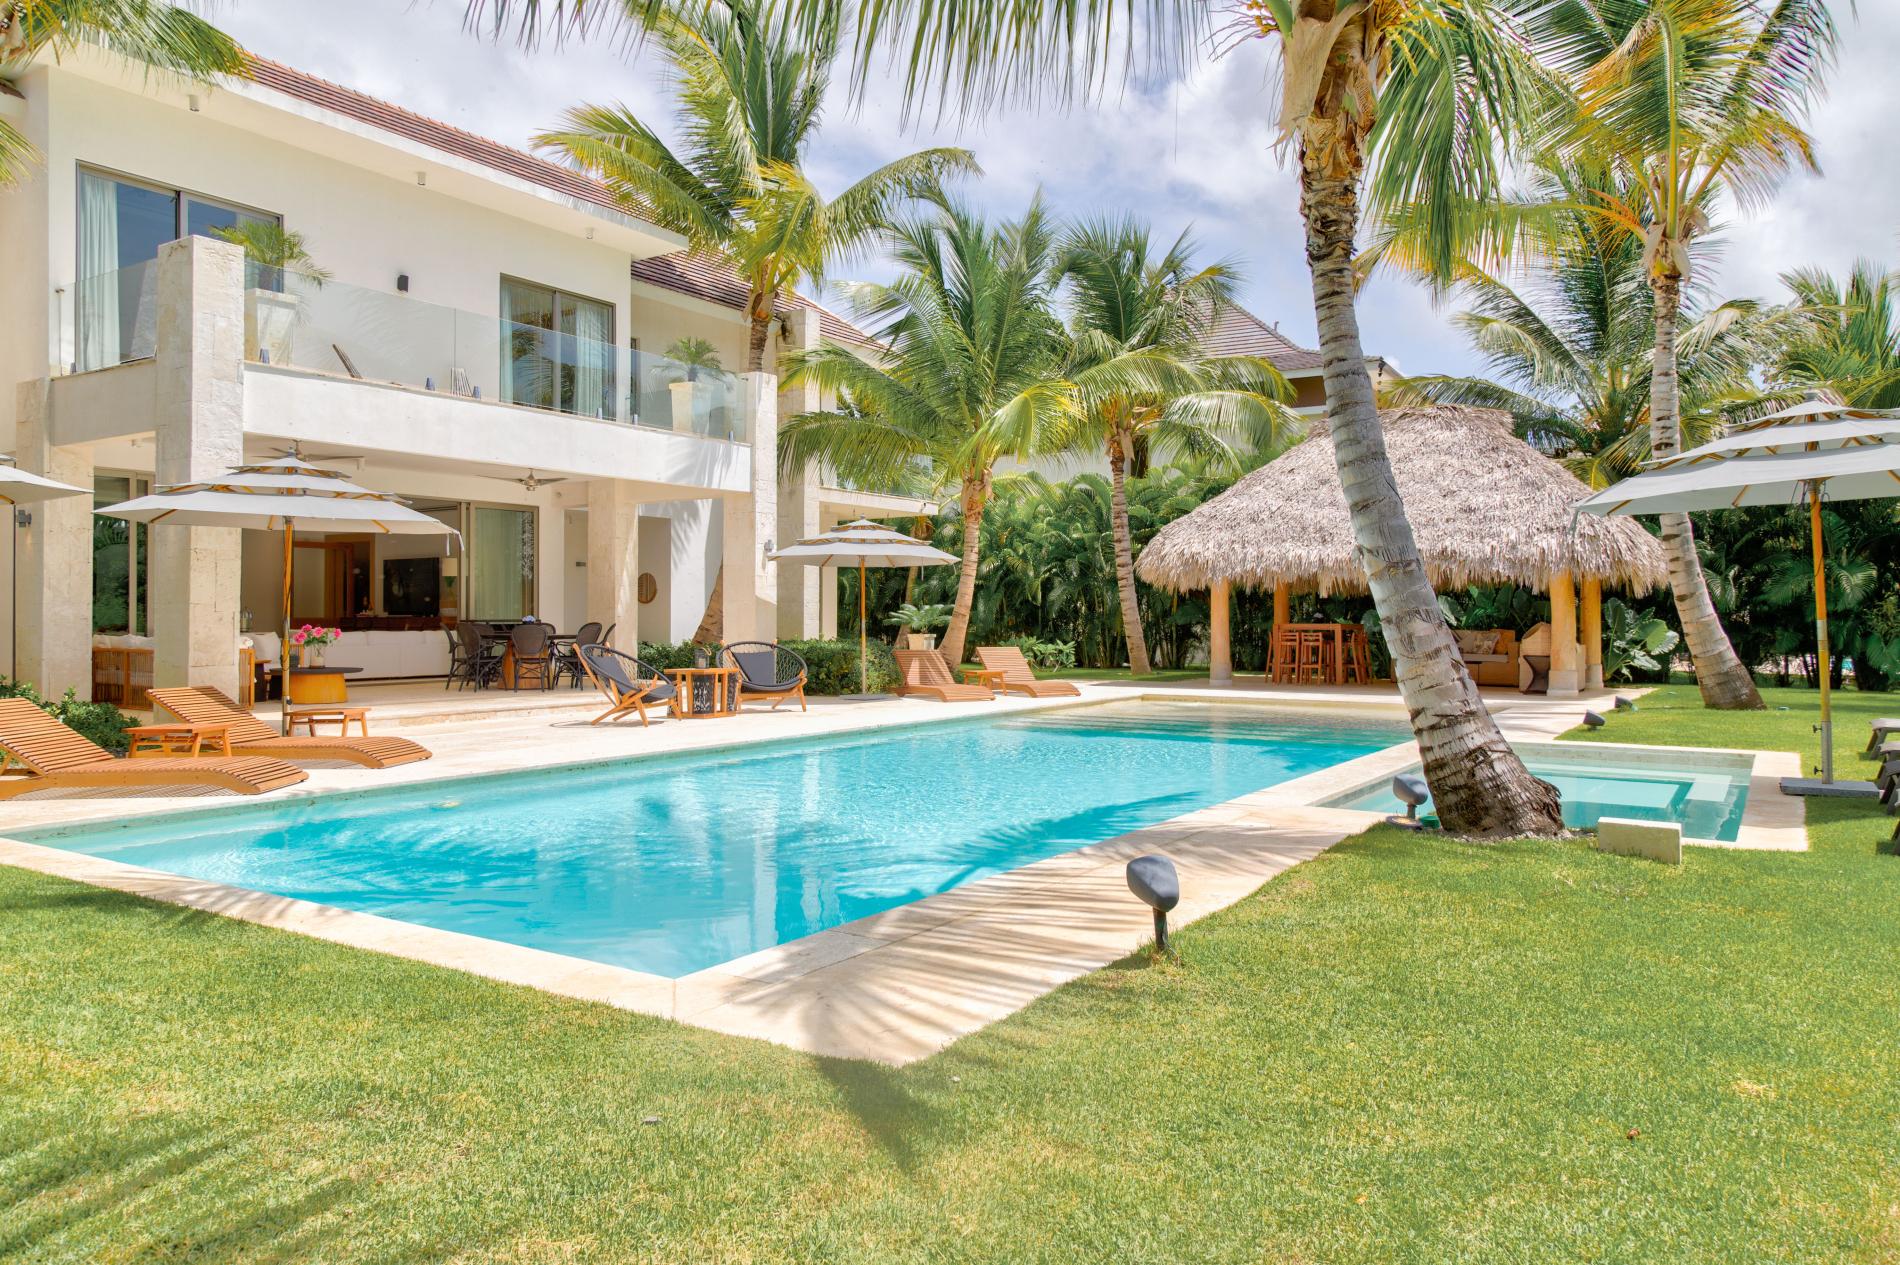 Property Image 1 - Prestigious Chic Villa with Pool and an Amazing Exotic Garden